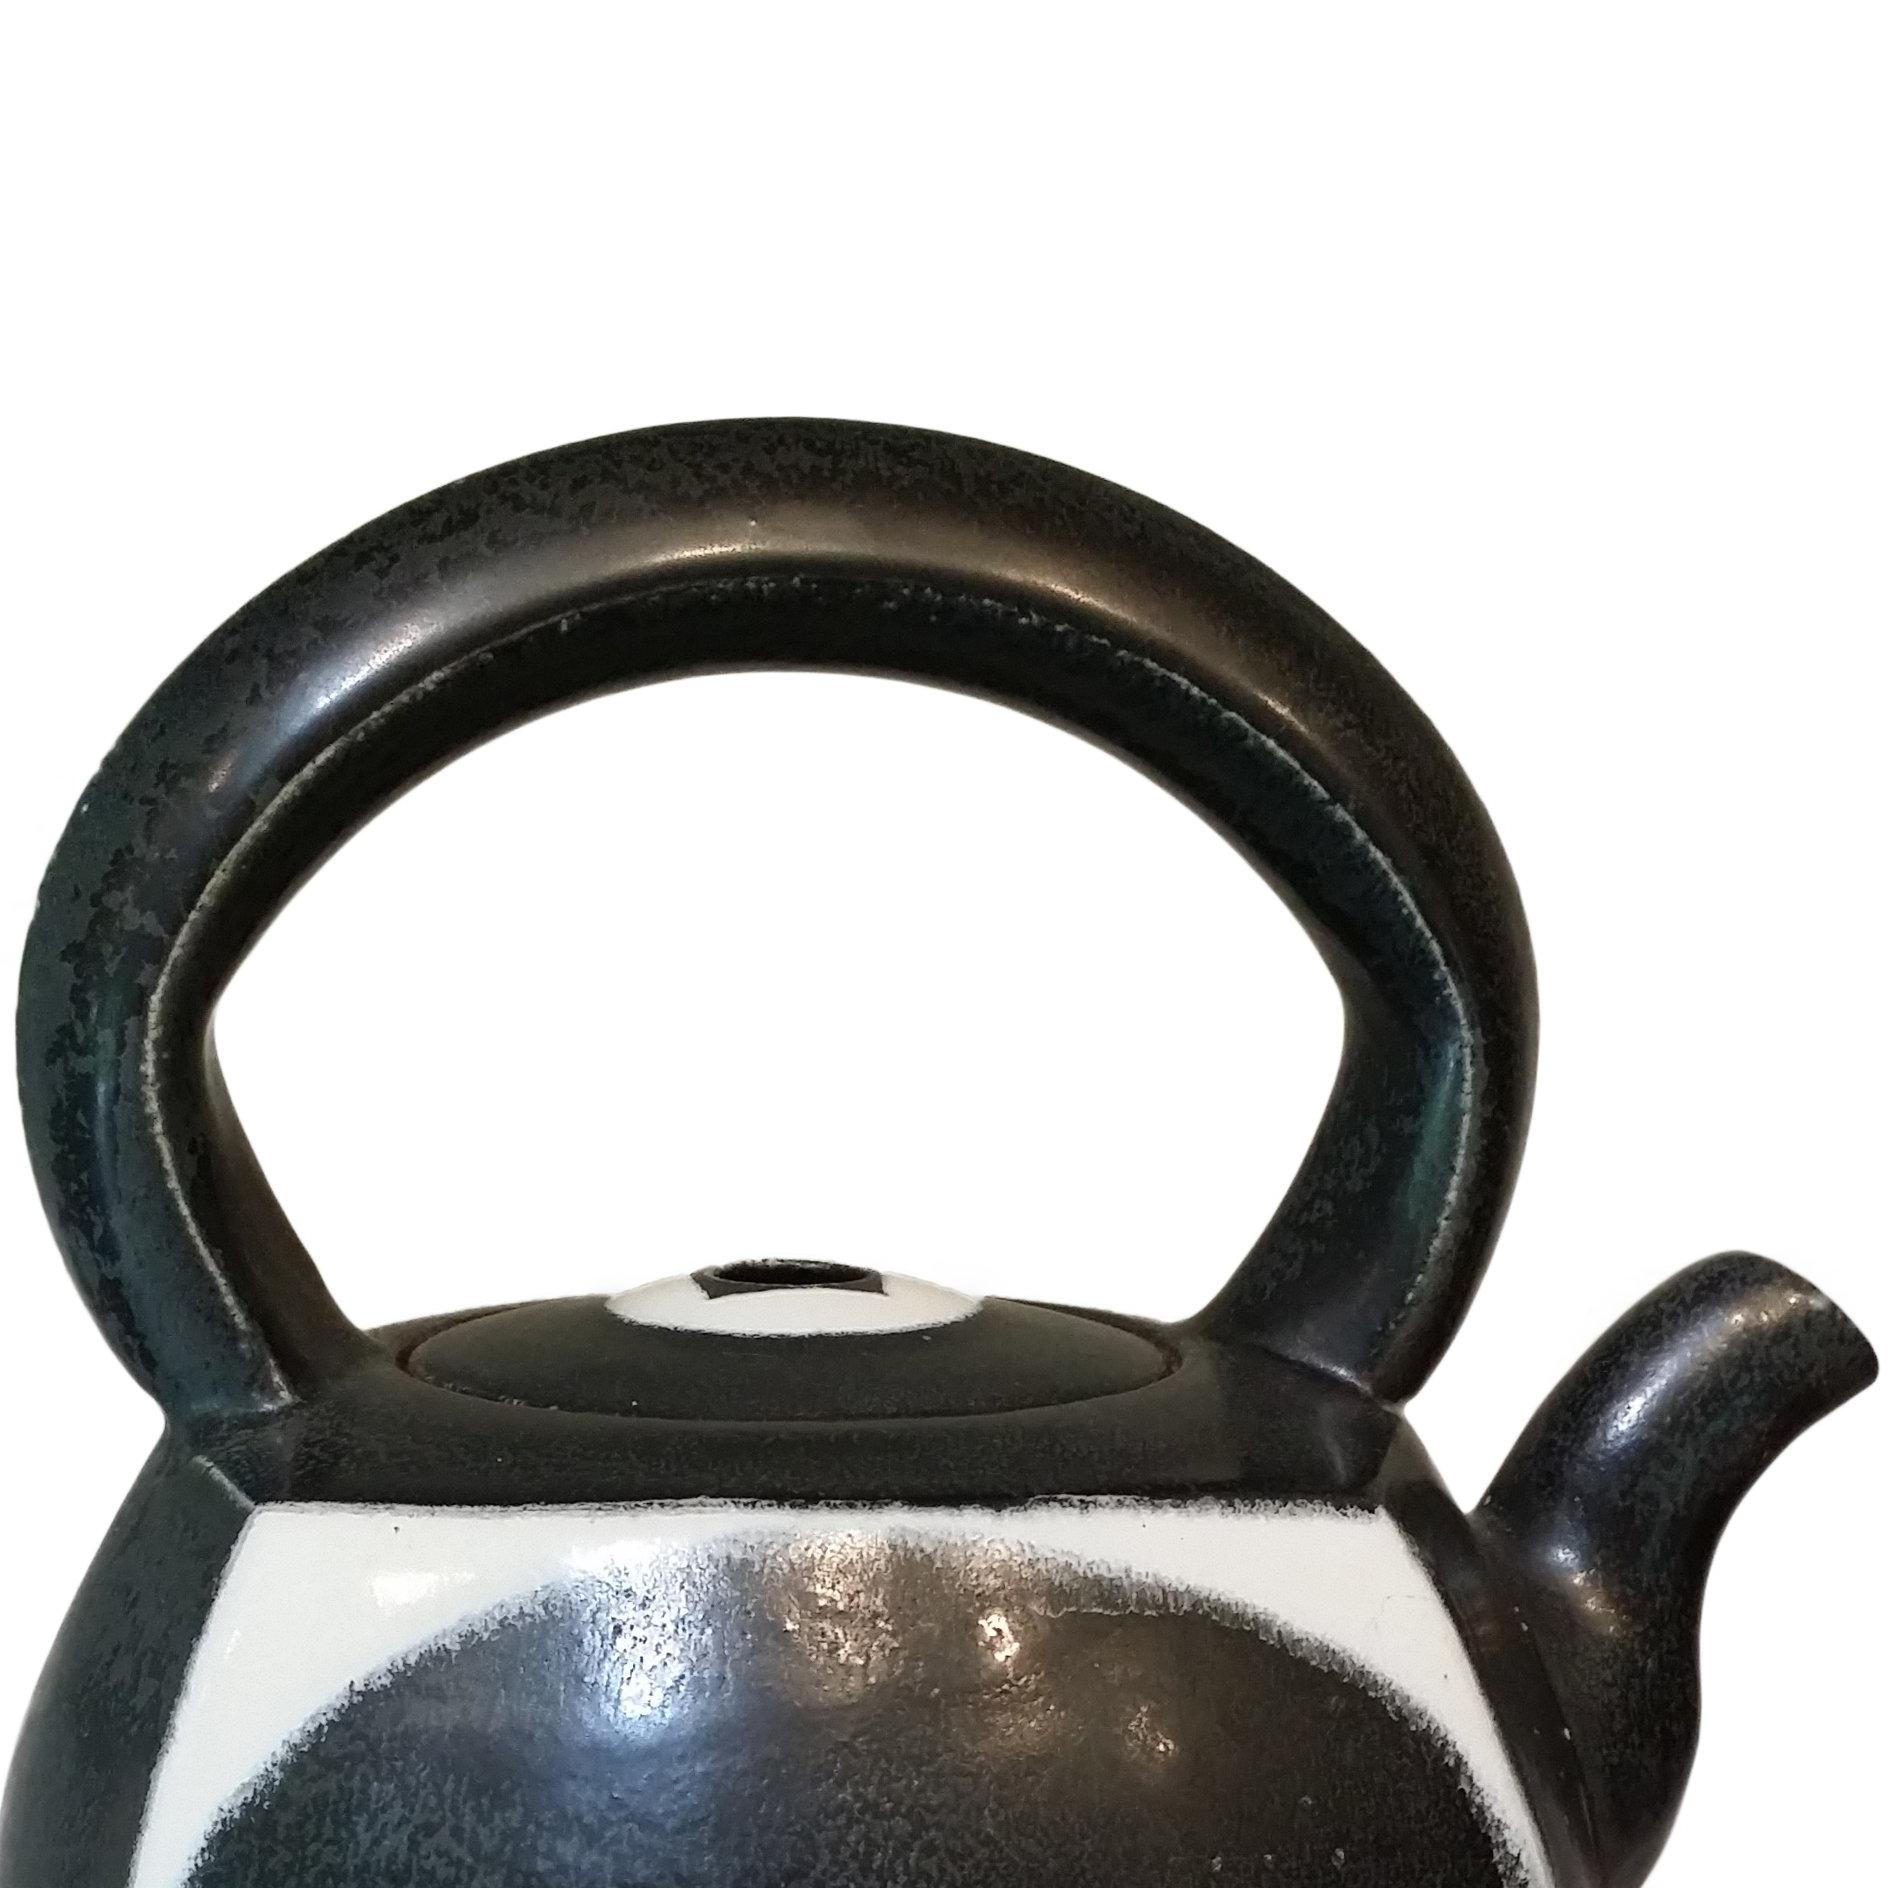 Teapot - Contemporary Art by Chris Staley